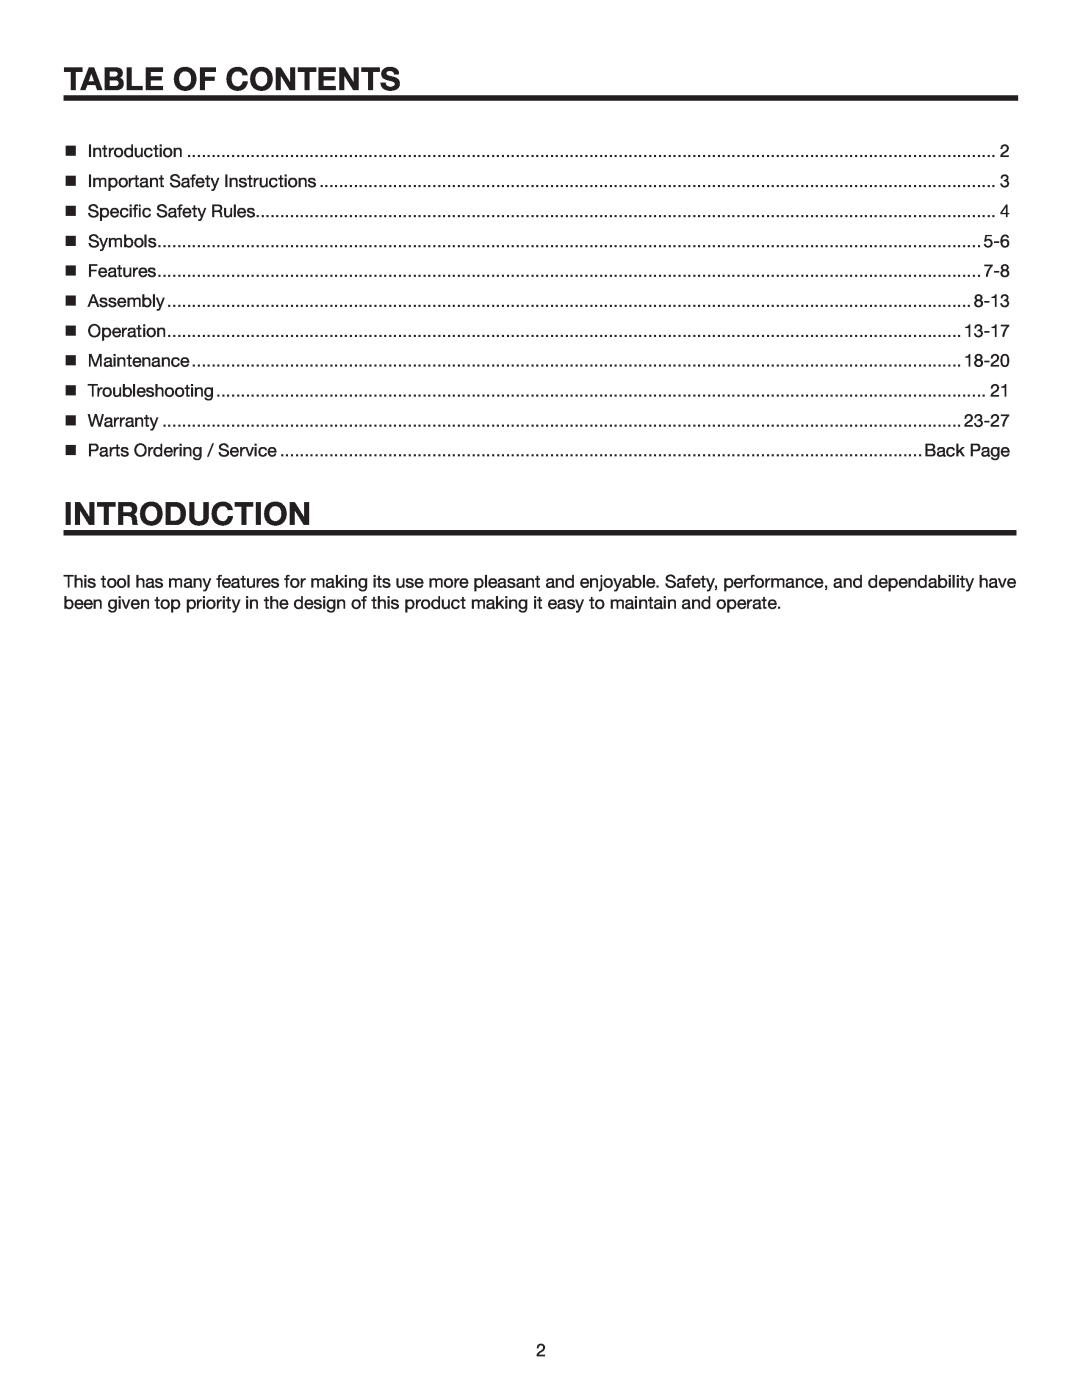 RIDGID RD80763 manual Table Of Contents, Introduction, 8-13, 13-17, 18-20, 23-27, Back Page 